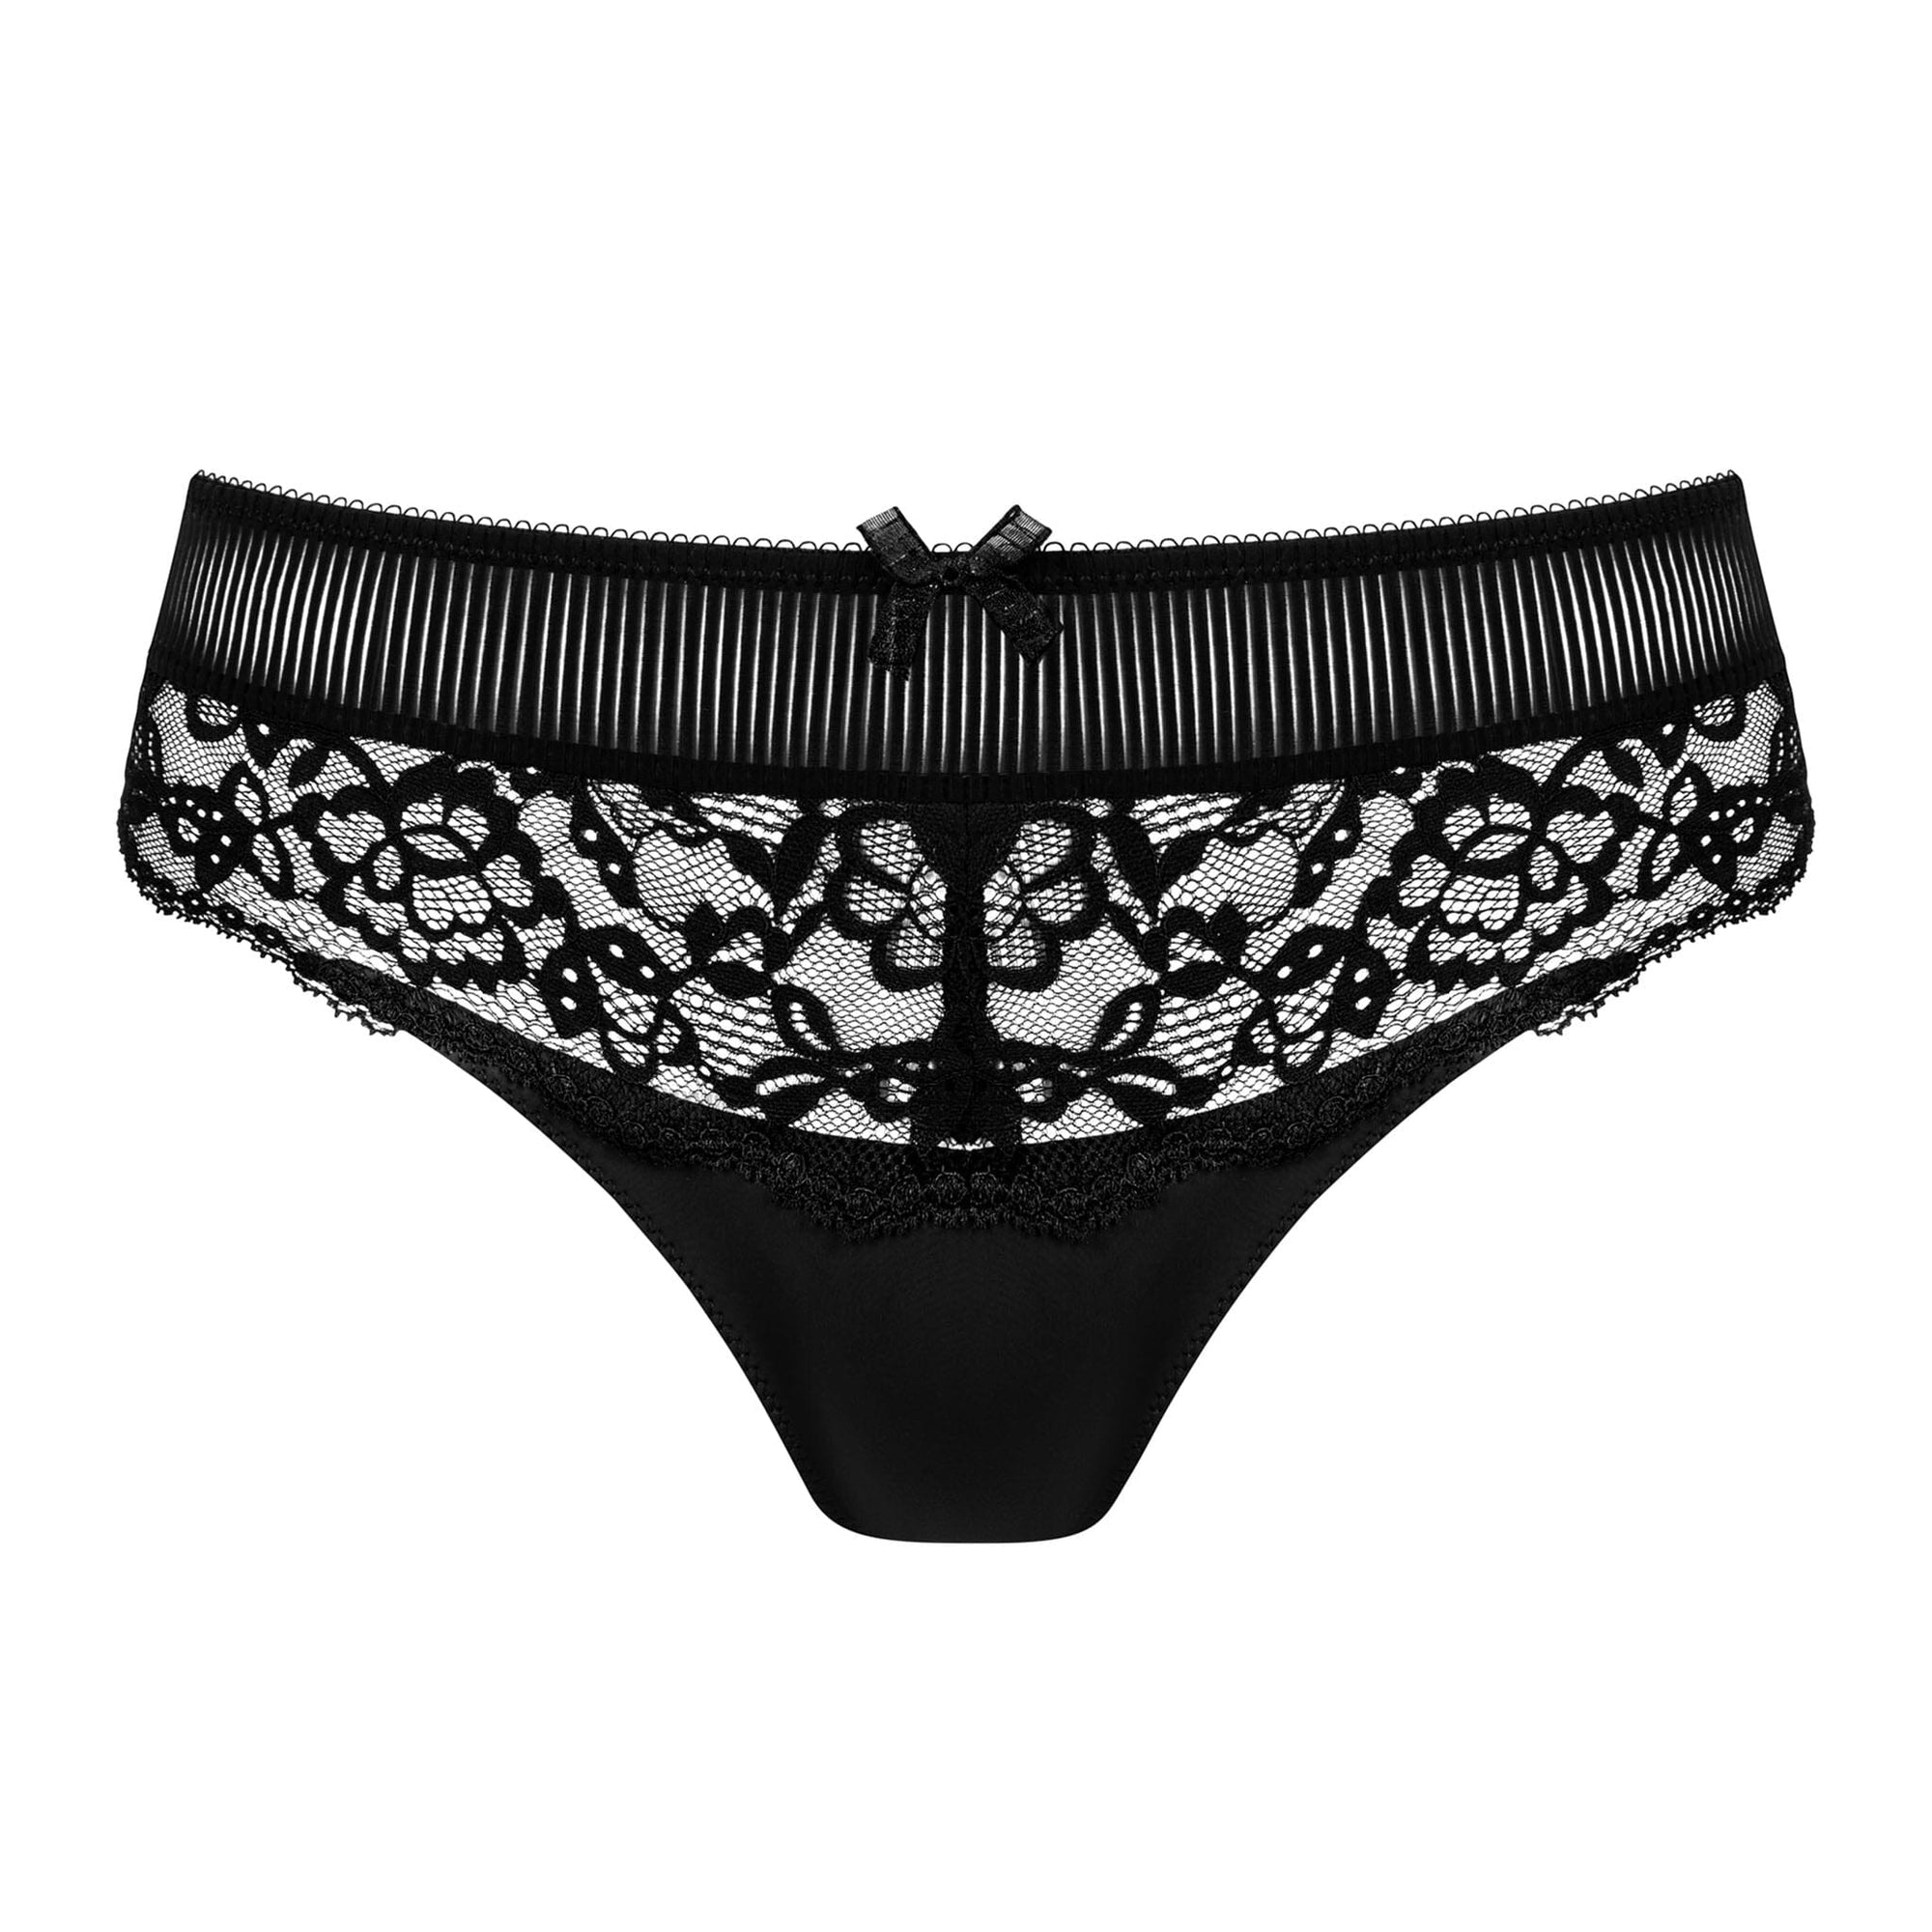 Amoena® Kyra Panty Shown in Black/Light Nude. Front View.